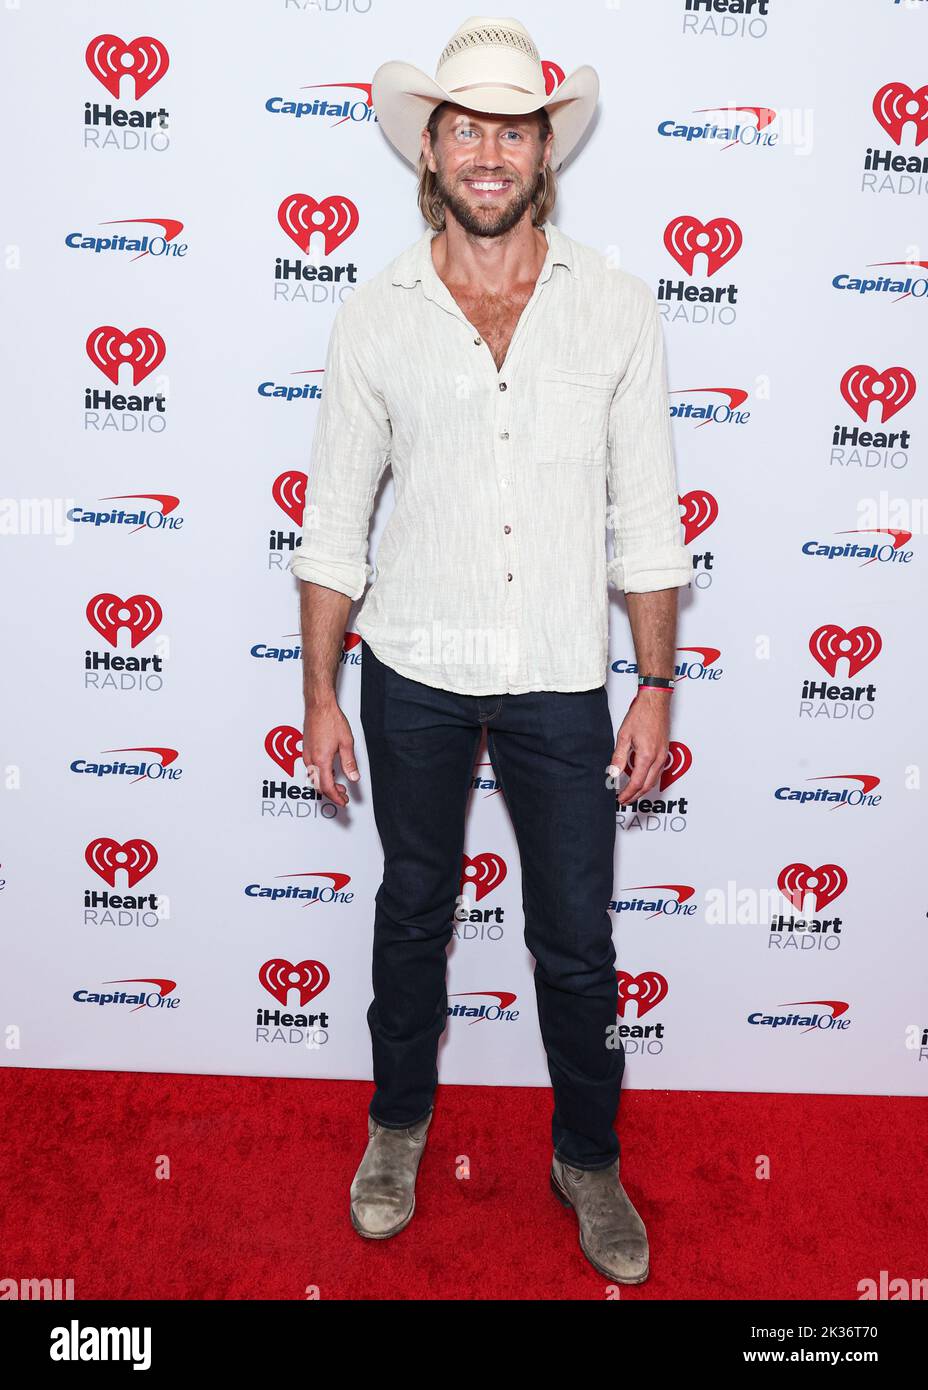 LAS VEGAS, NEVADA, USA - SEPTEMBER 24: Matt Barr poses in the press room at the 2022 iHeartRadio Music Festival - Night 2 held at the T-Mobile Arena on September 24, 2022 in Las Vegas, Nevada, United States. (Photo by Xavier Collin/Image Press Agency) Stock Photo